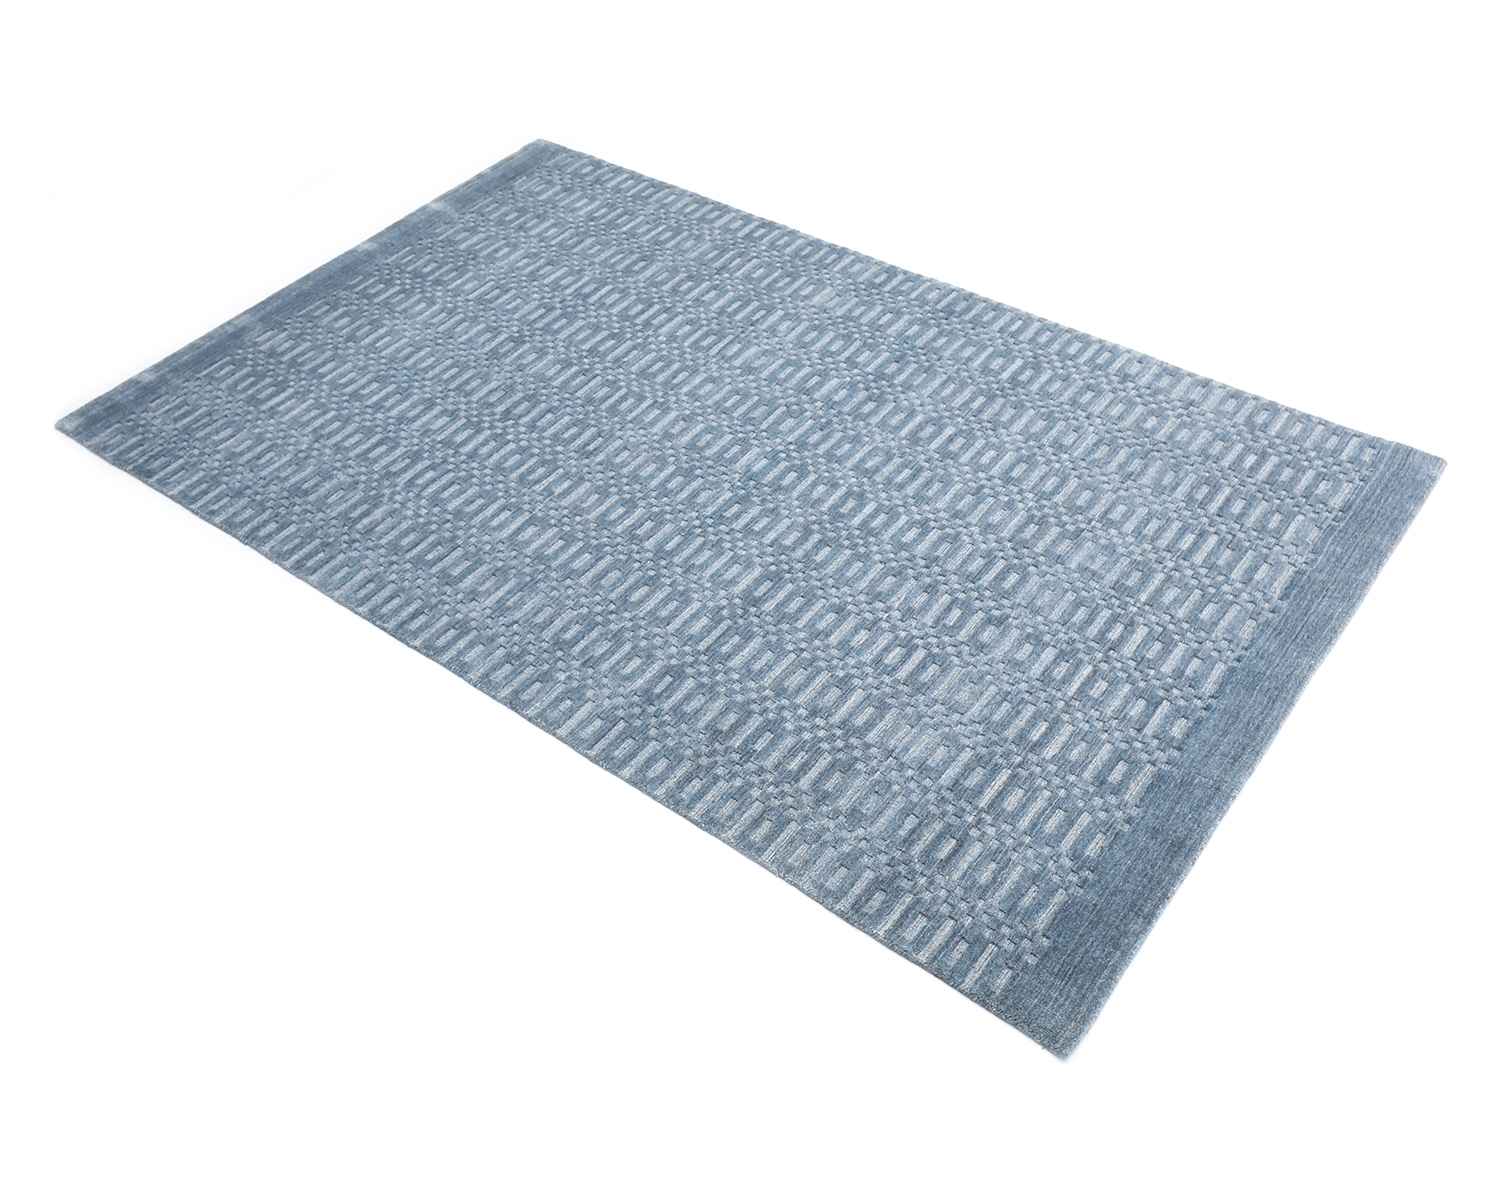 Truflle Table Mats